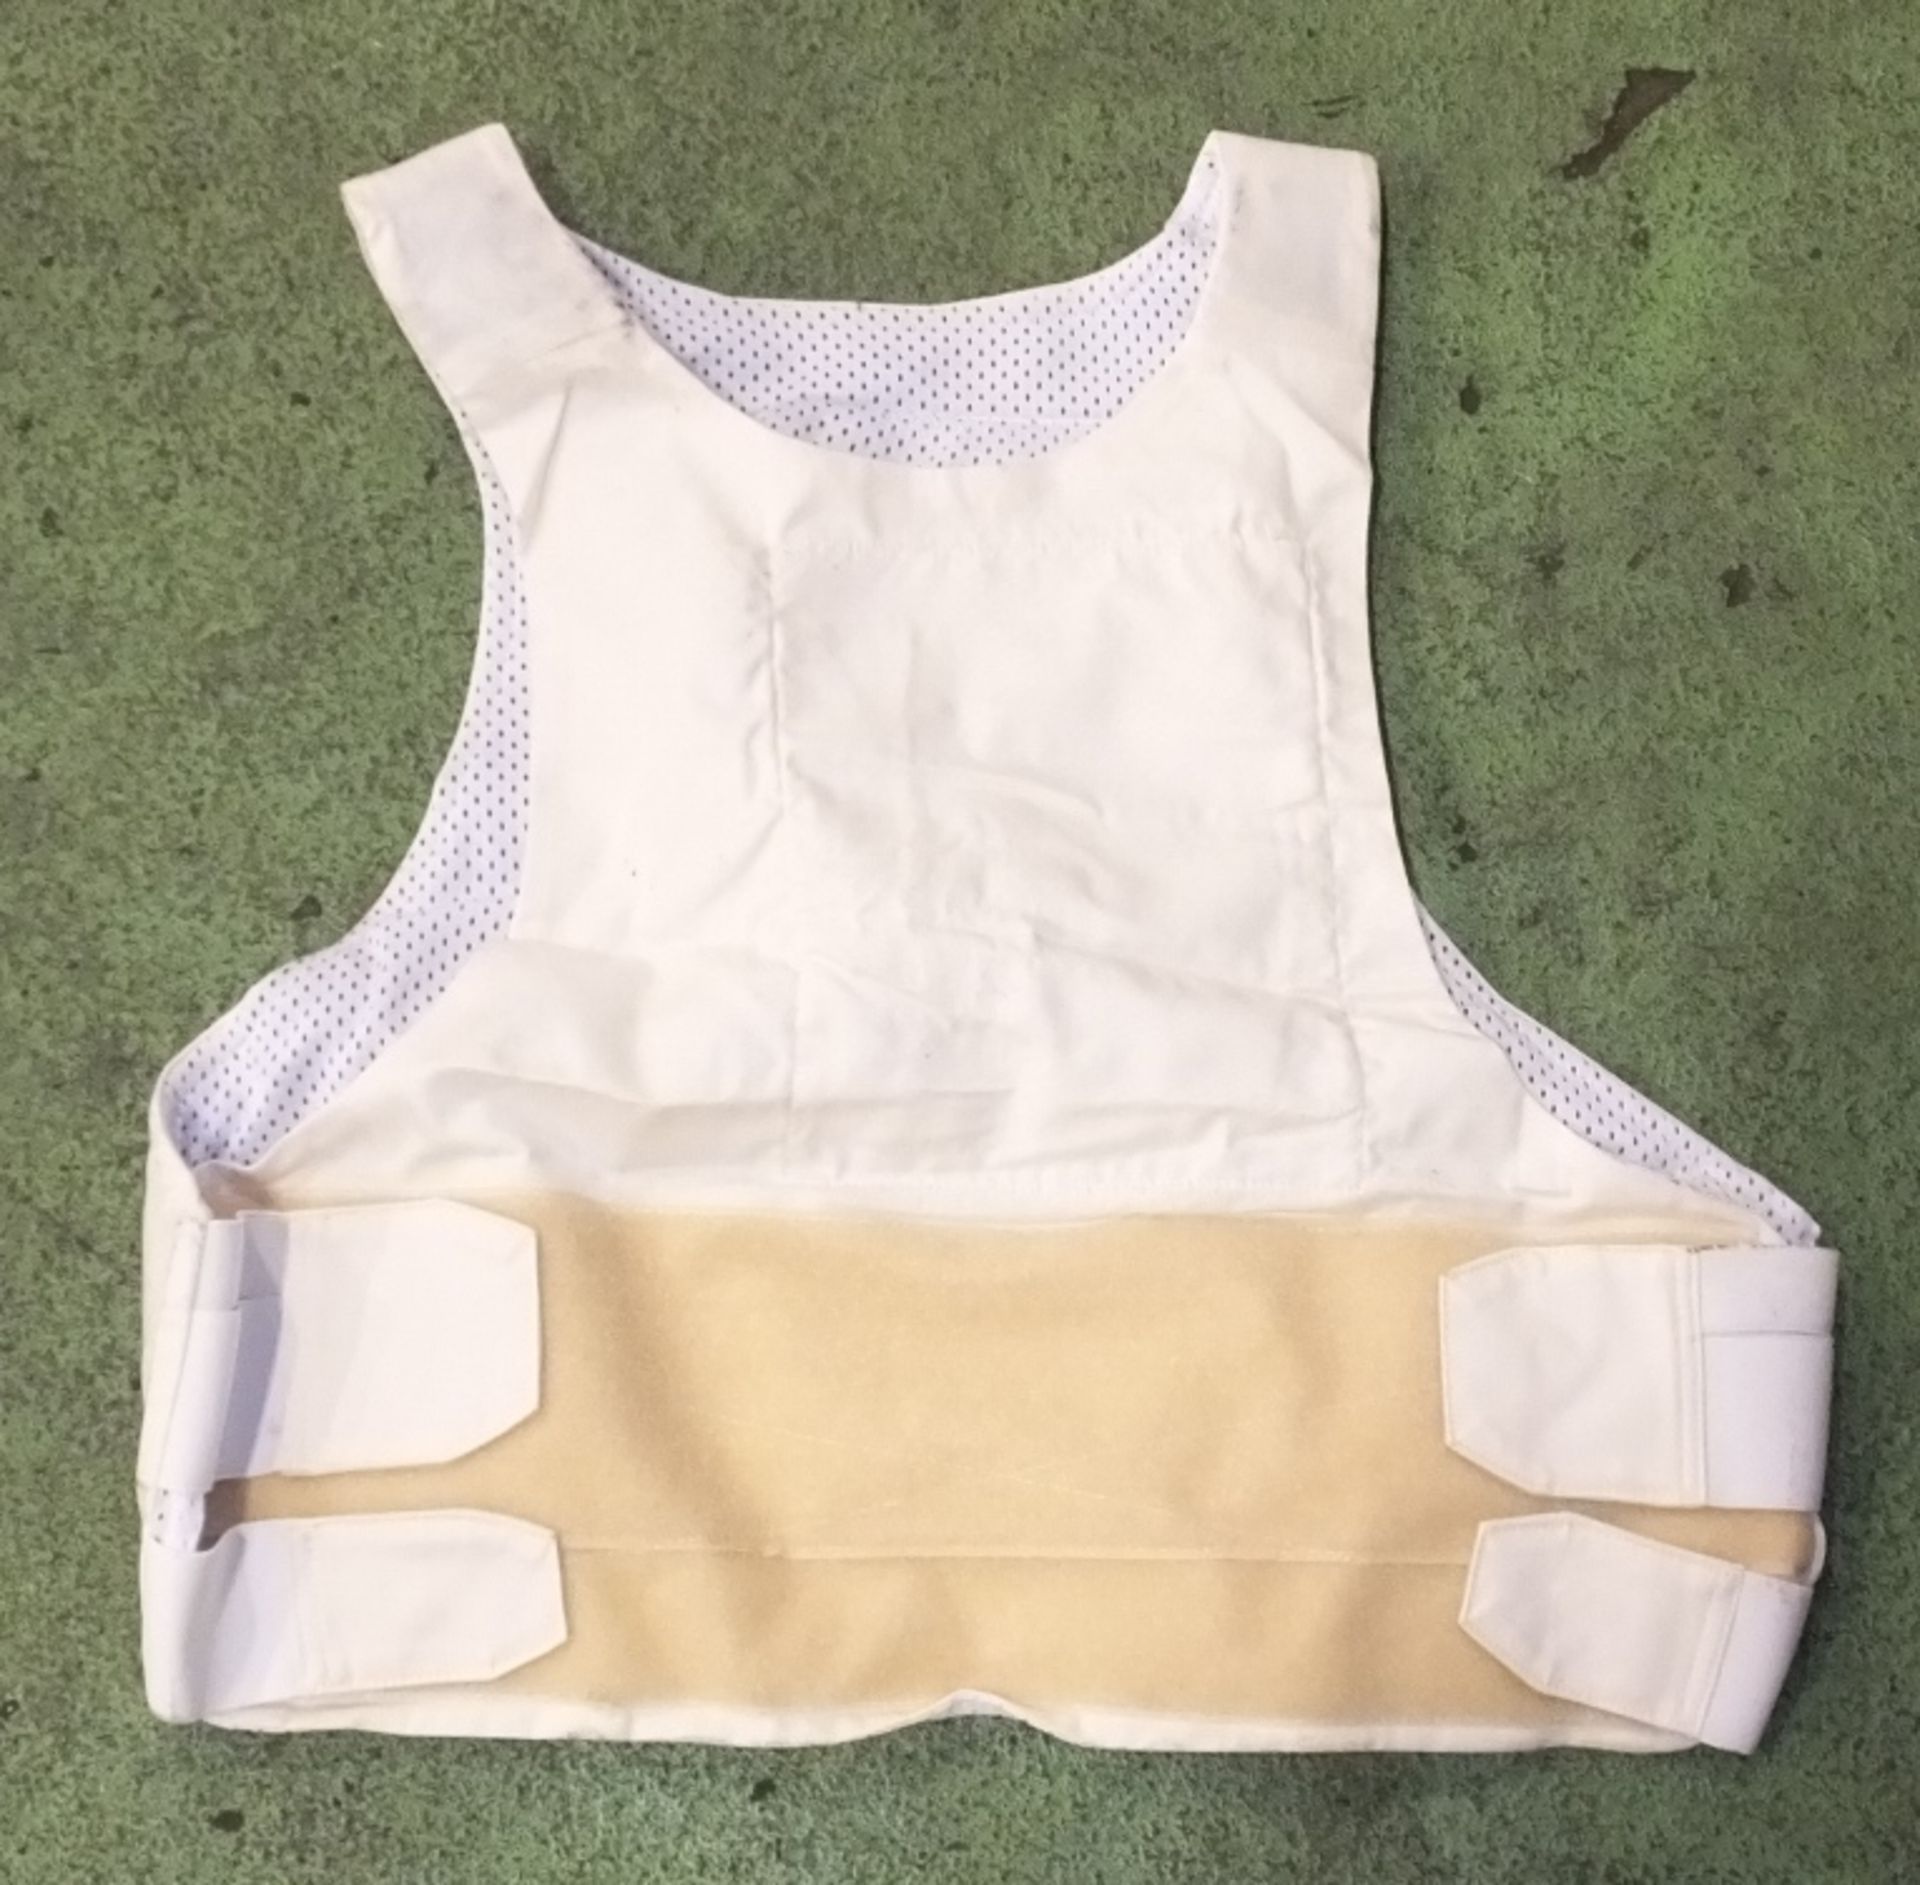 5x Cooneen Protection vests - NSN 8470-99-727-7329 - Image 2 of 3